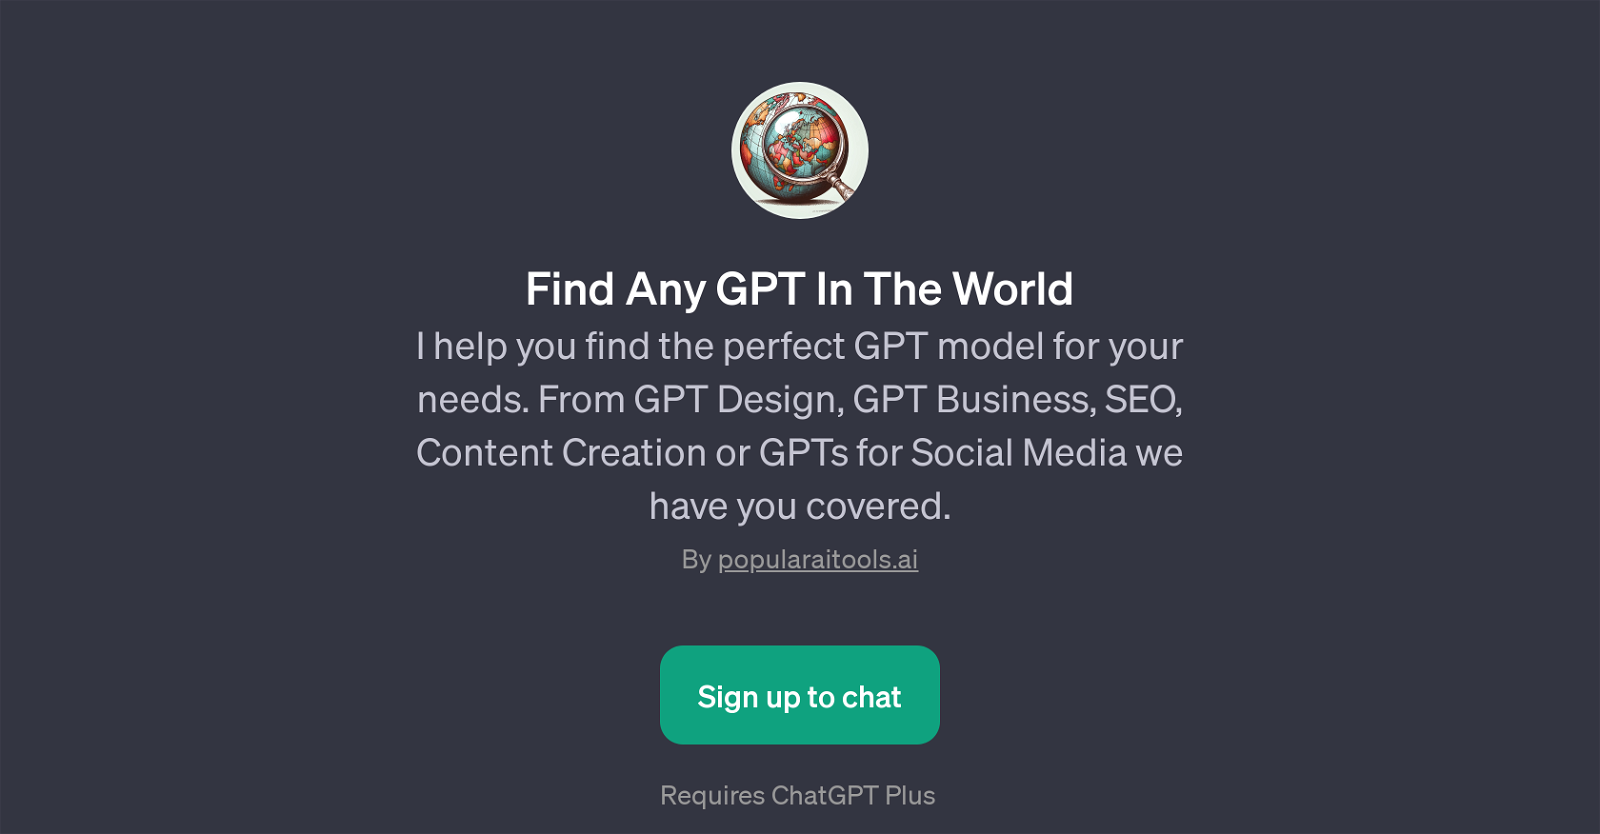 Find Any GPT In The World website